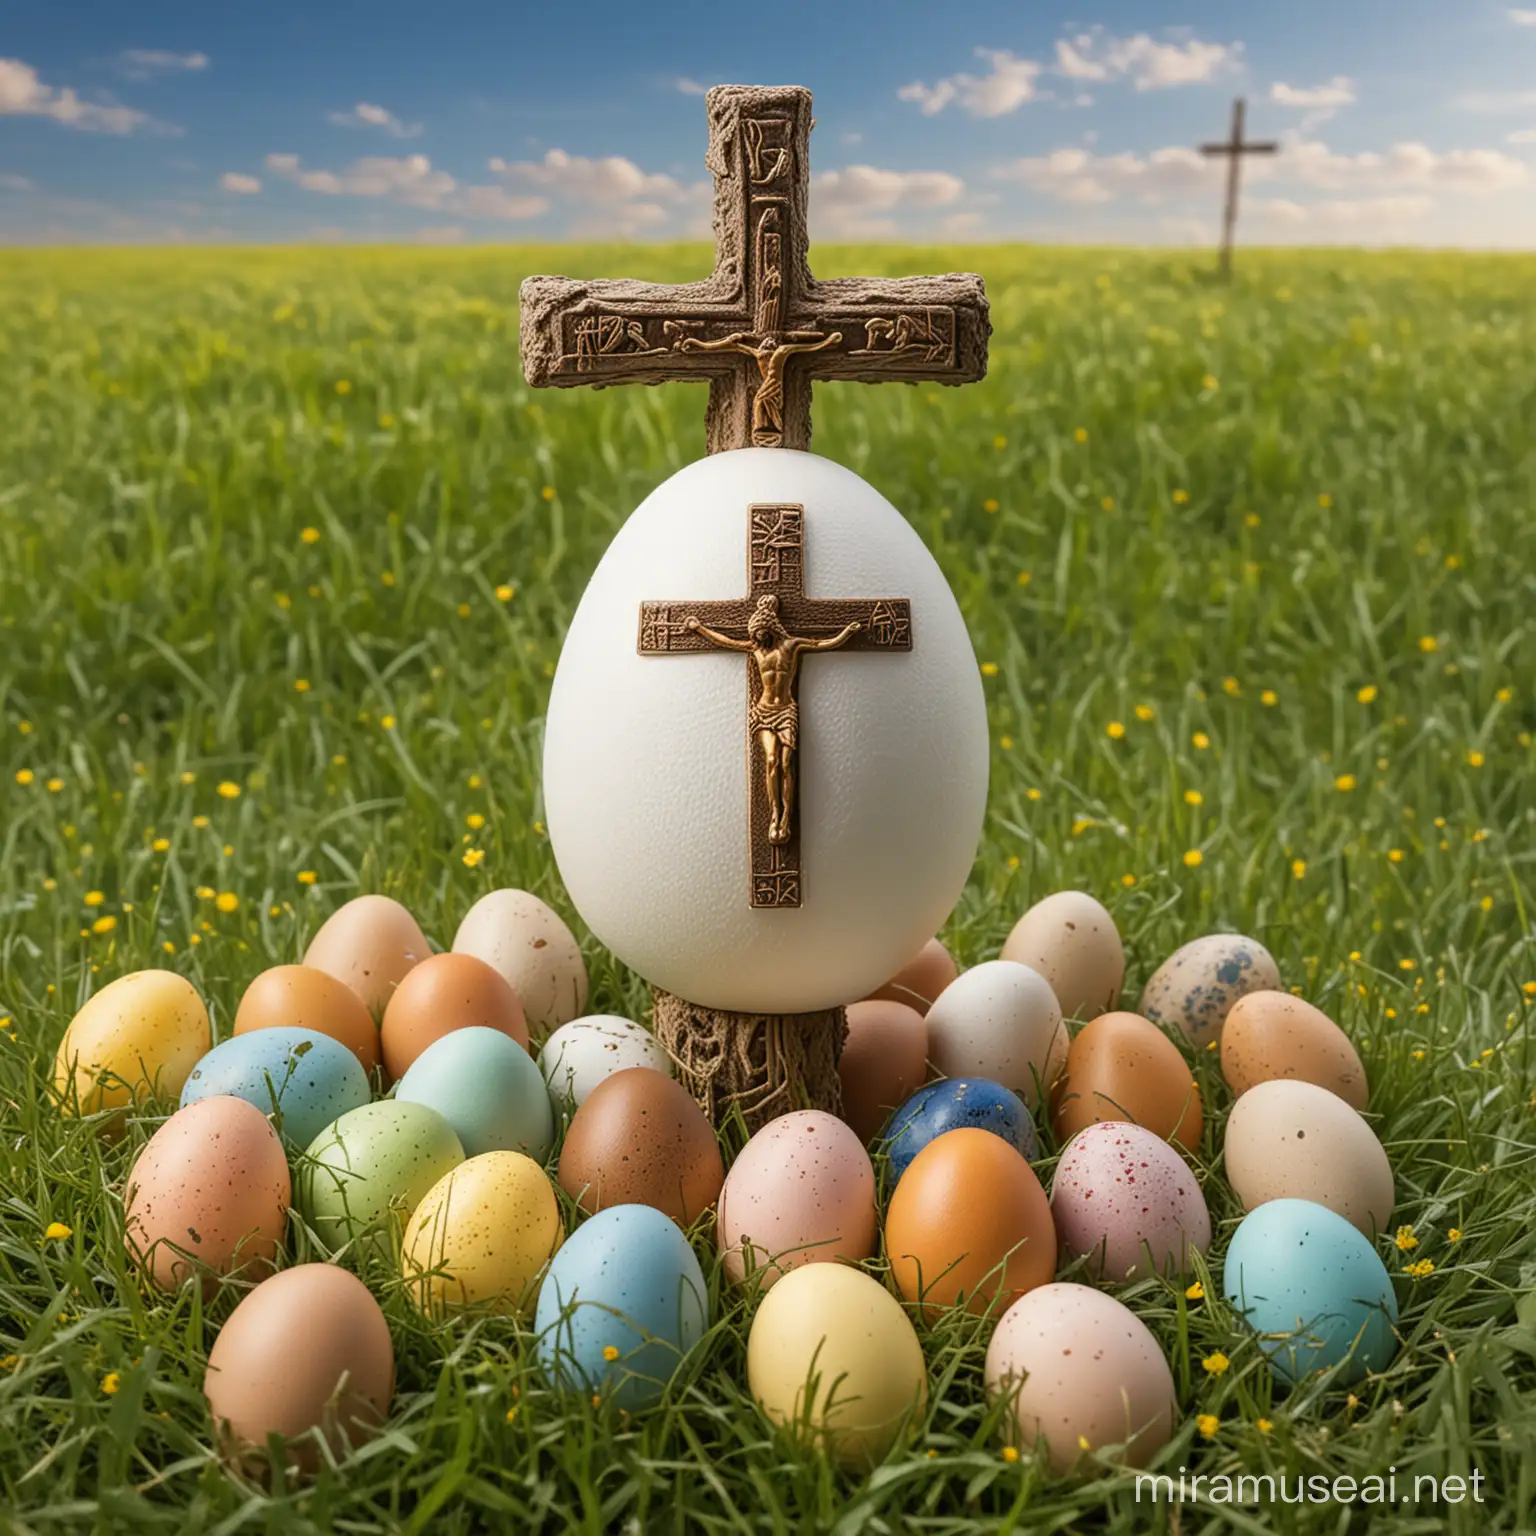 Eastern egg with Jesusu on cross on surface. Egg is on spring meadow covered with various colored eggs